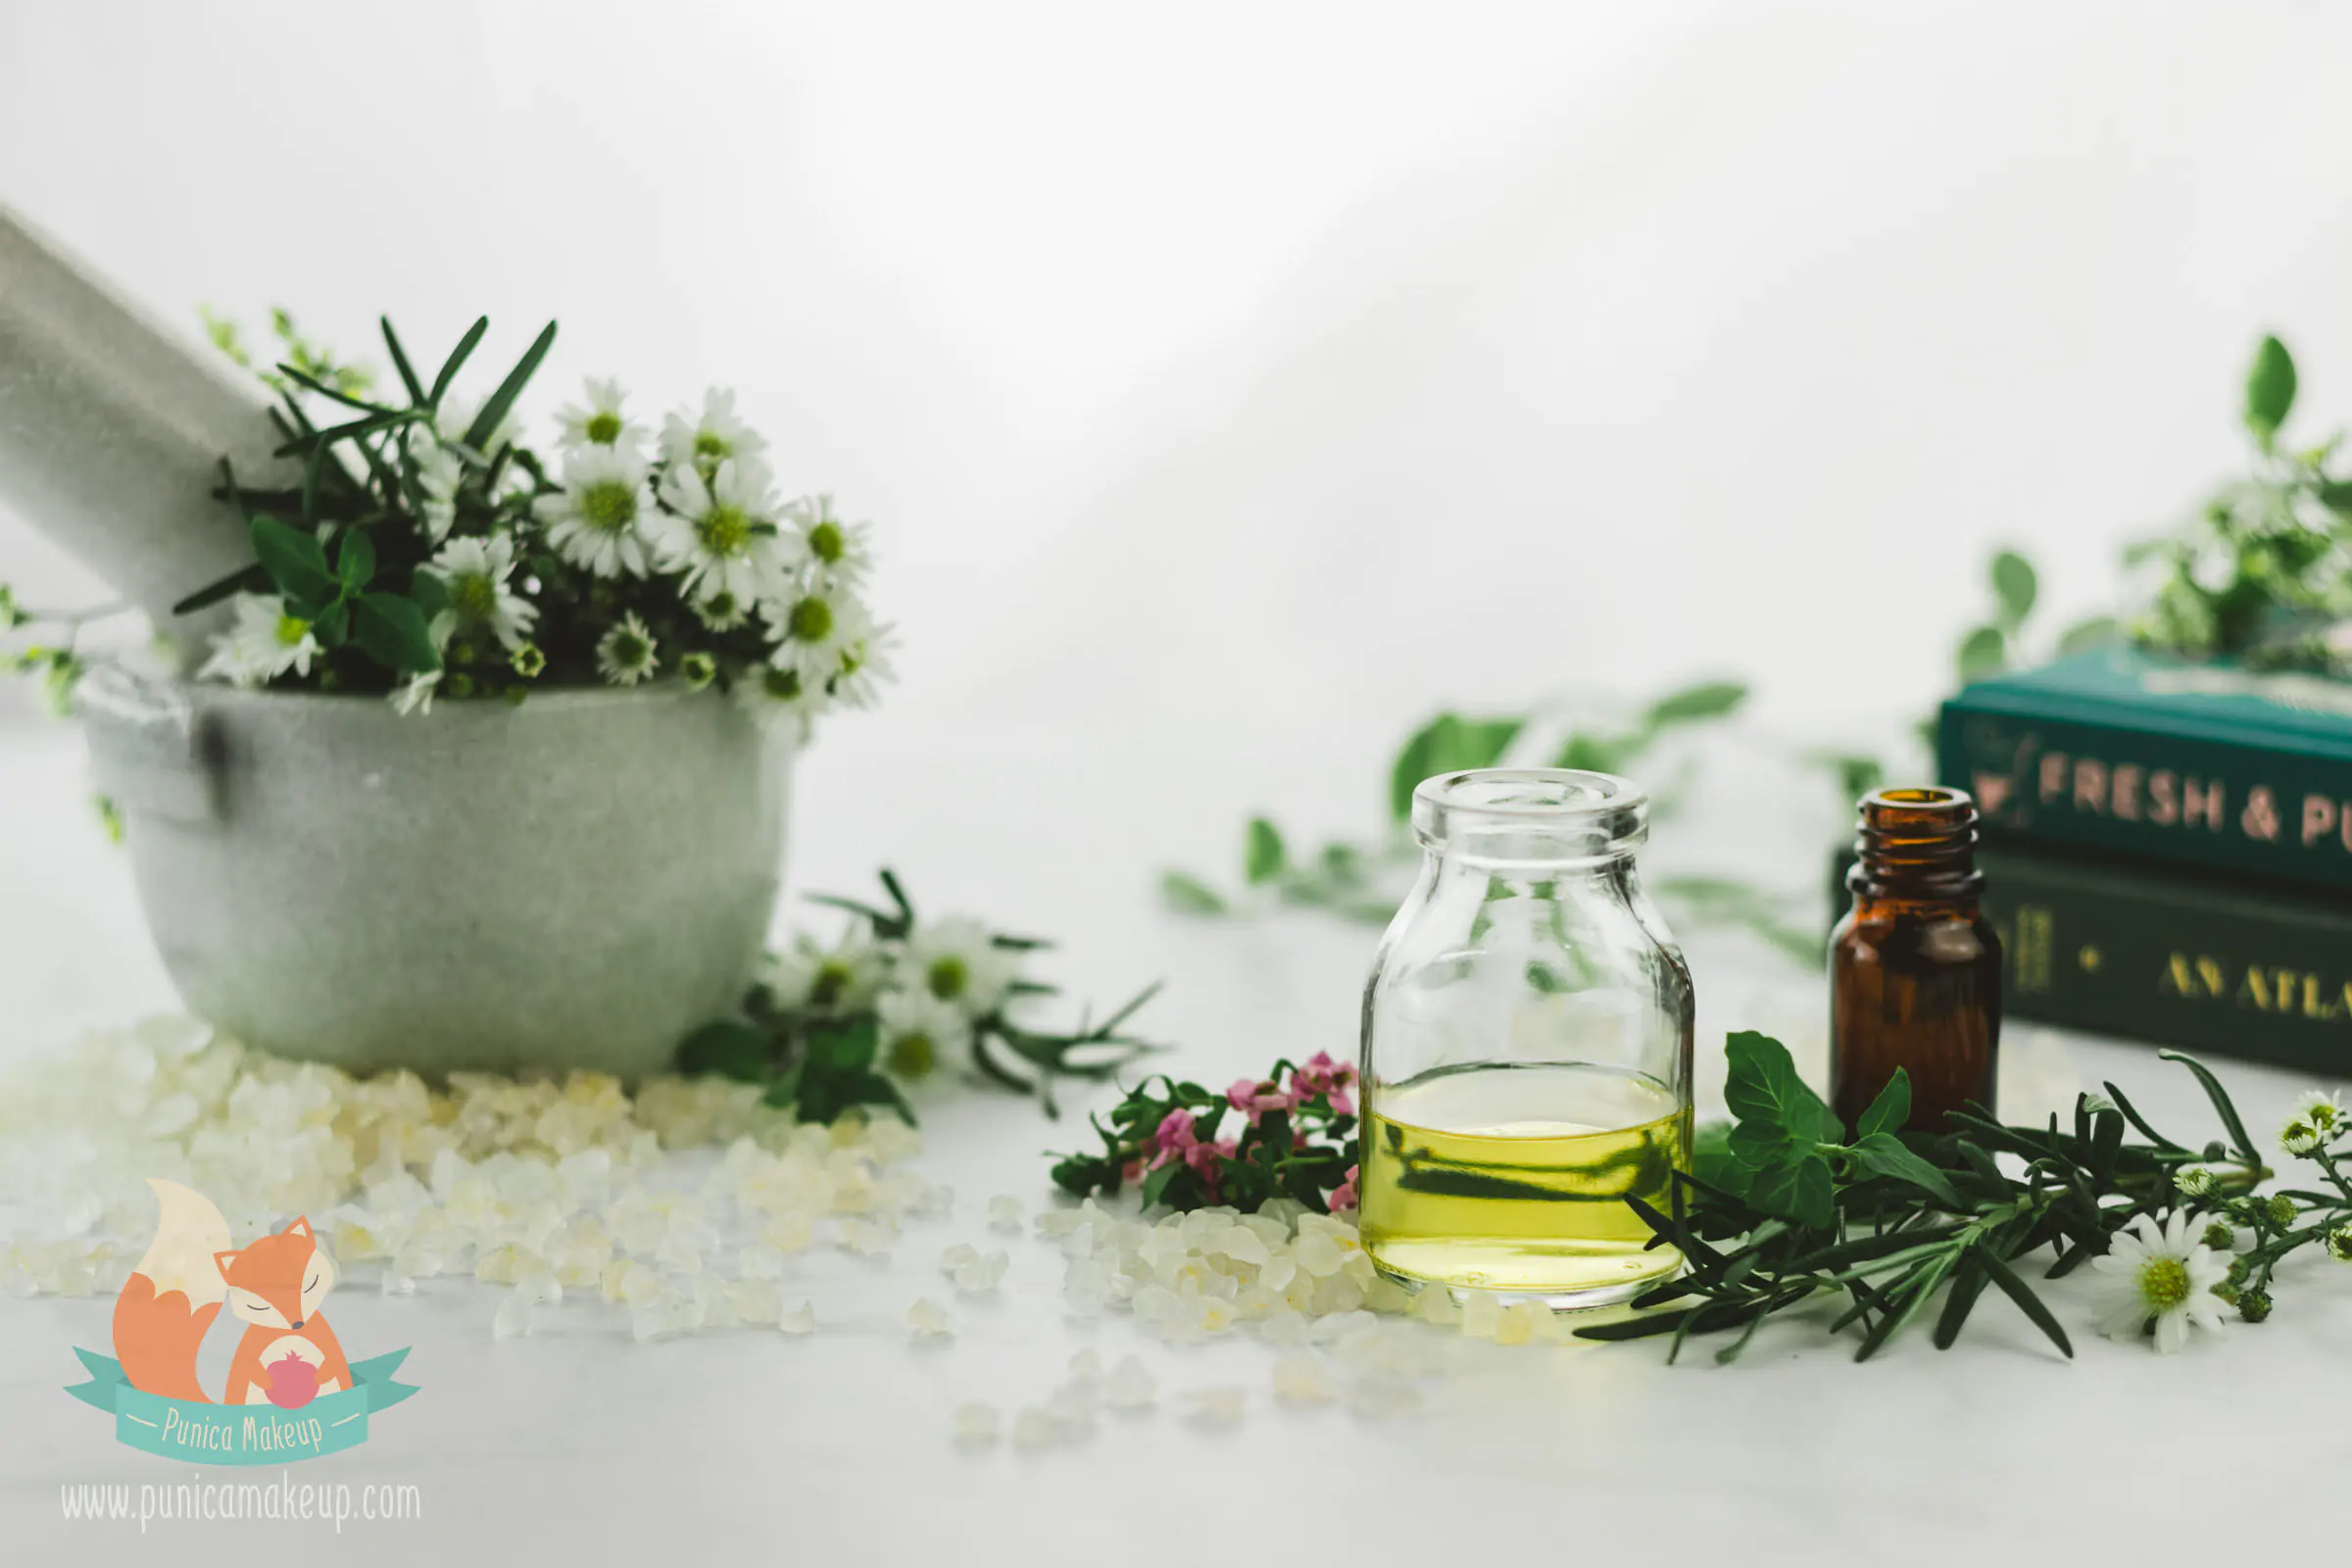 The medicinal and beautifying benefits of essential oils aromatics